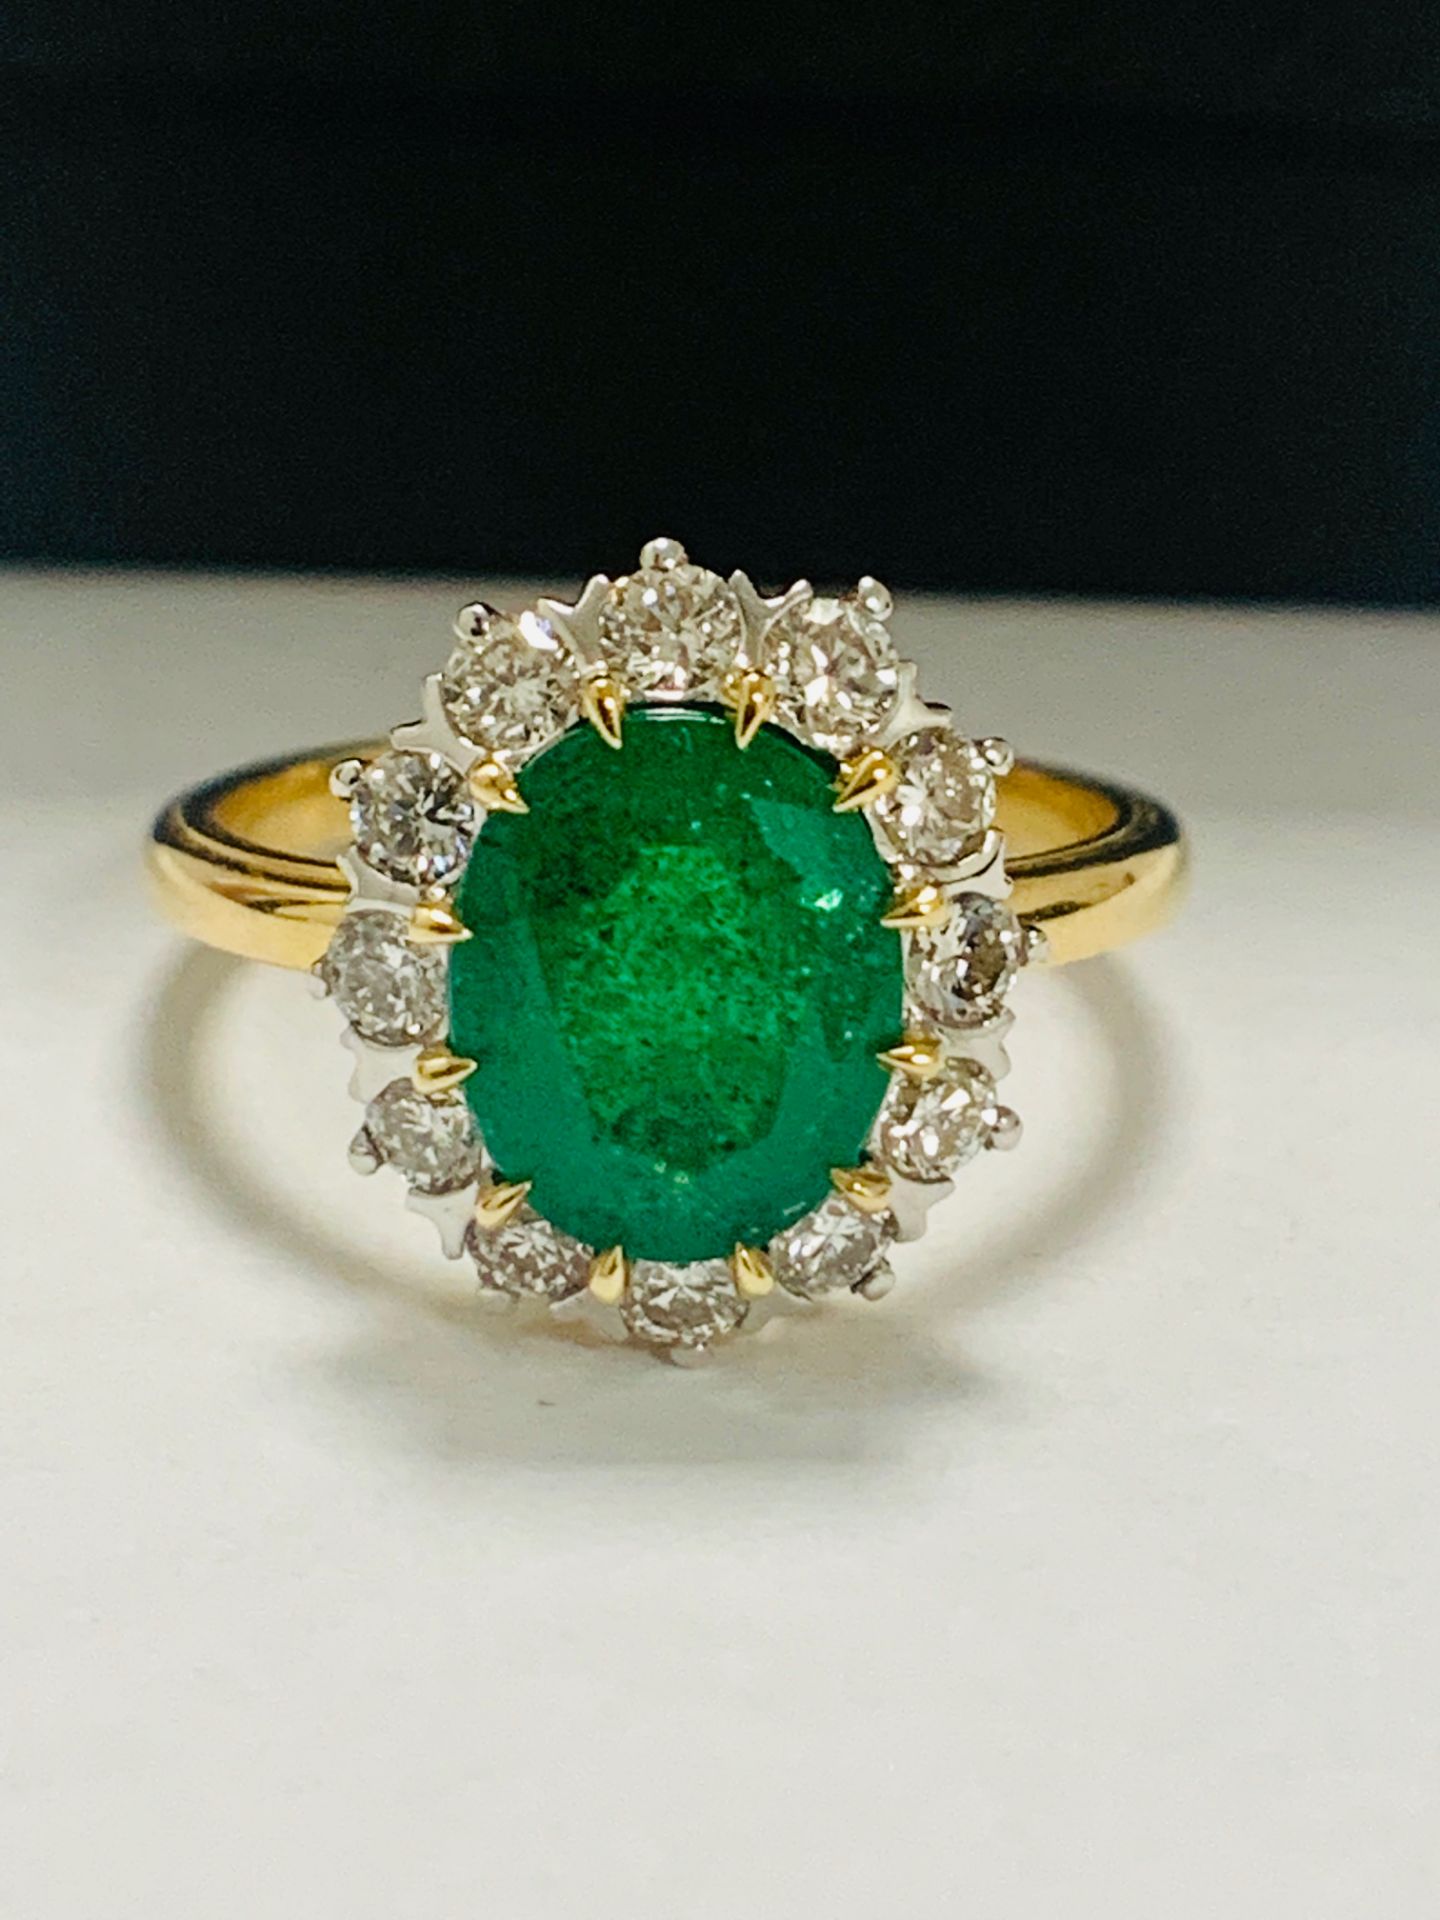 14ct Yellow Gold Emerald and Diamond Ring Featuring Centre, Oval Cut, Dark Green Emerald - Image 9 of 12